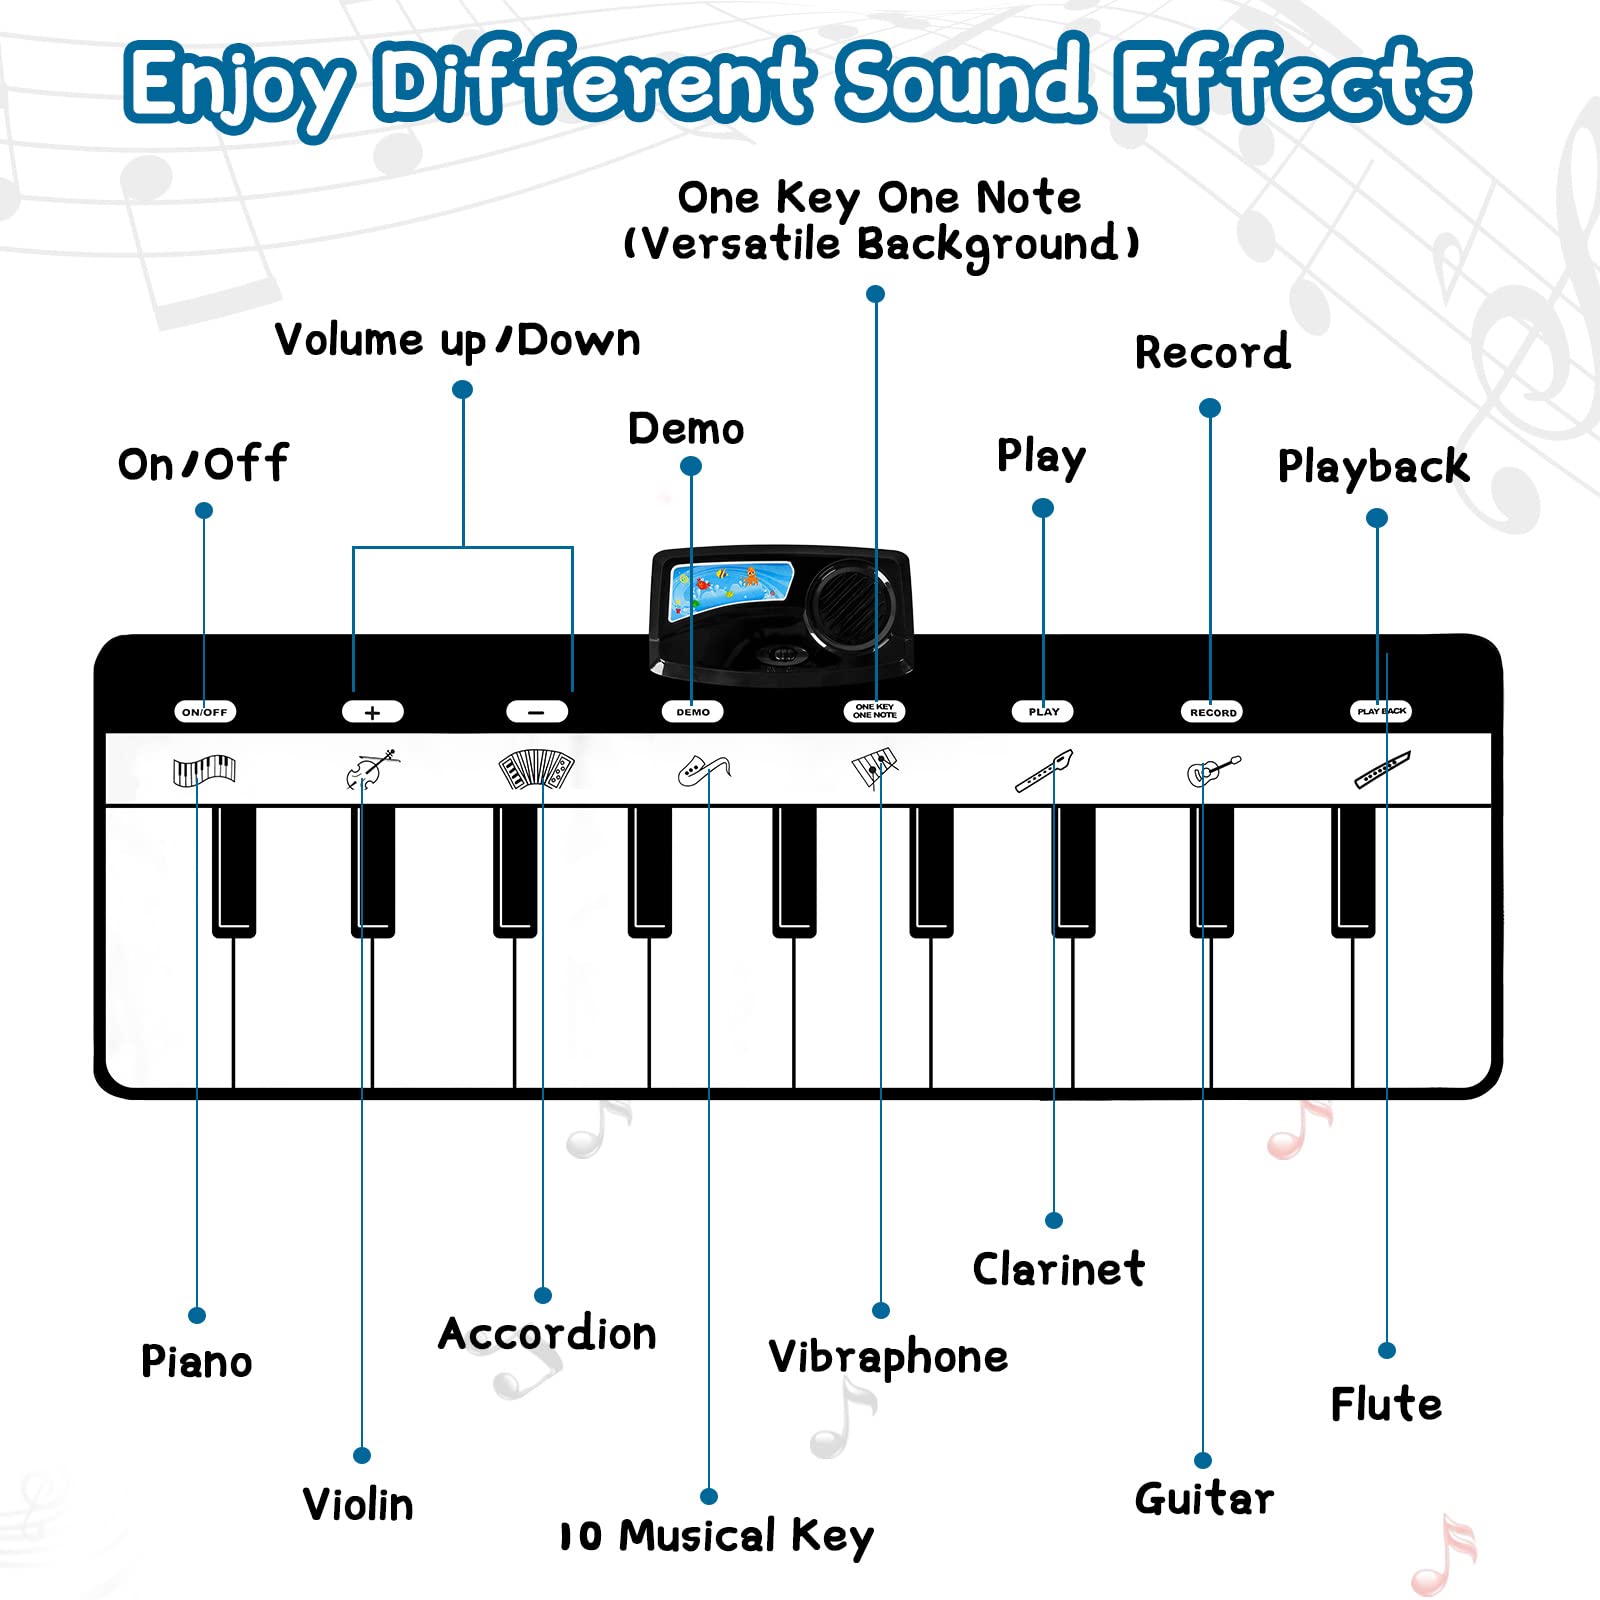 M SANMERSEN Piano Mat, Kids Musical Mat Floor Piano Keyboard Mat with 8 Instruments Sounds Music Dance Touch Play Mat, Early Educational Toys Birthday Gifts for 1 2 3 4 5 Year Old Boys Girls